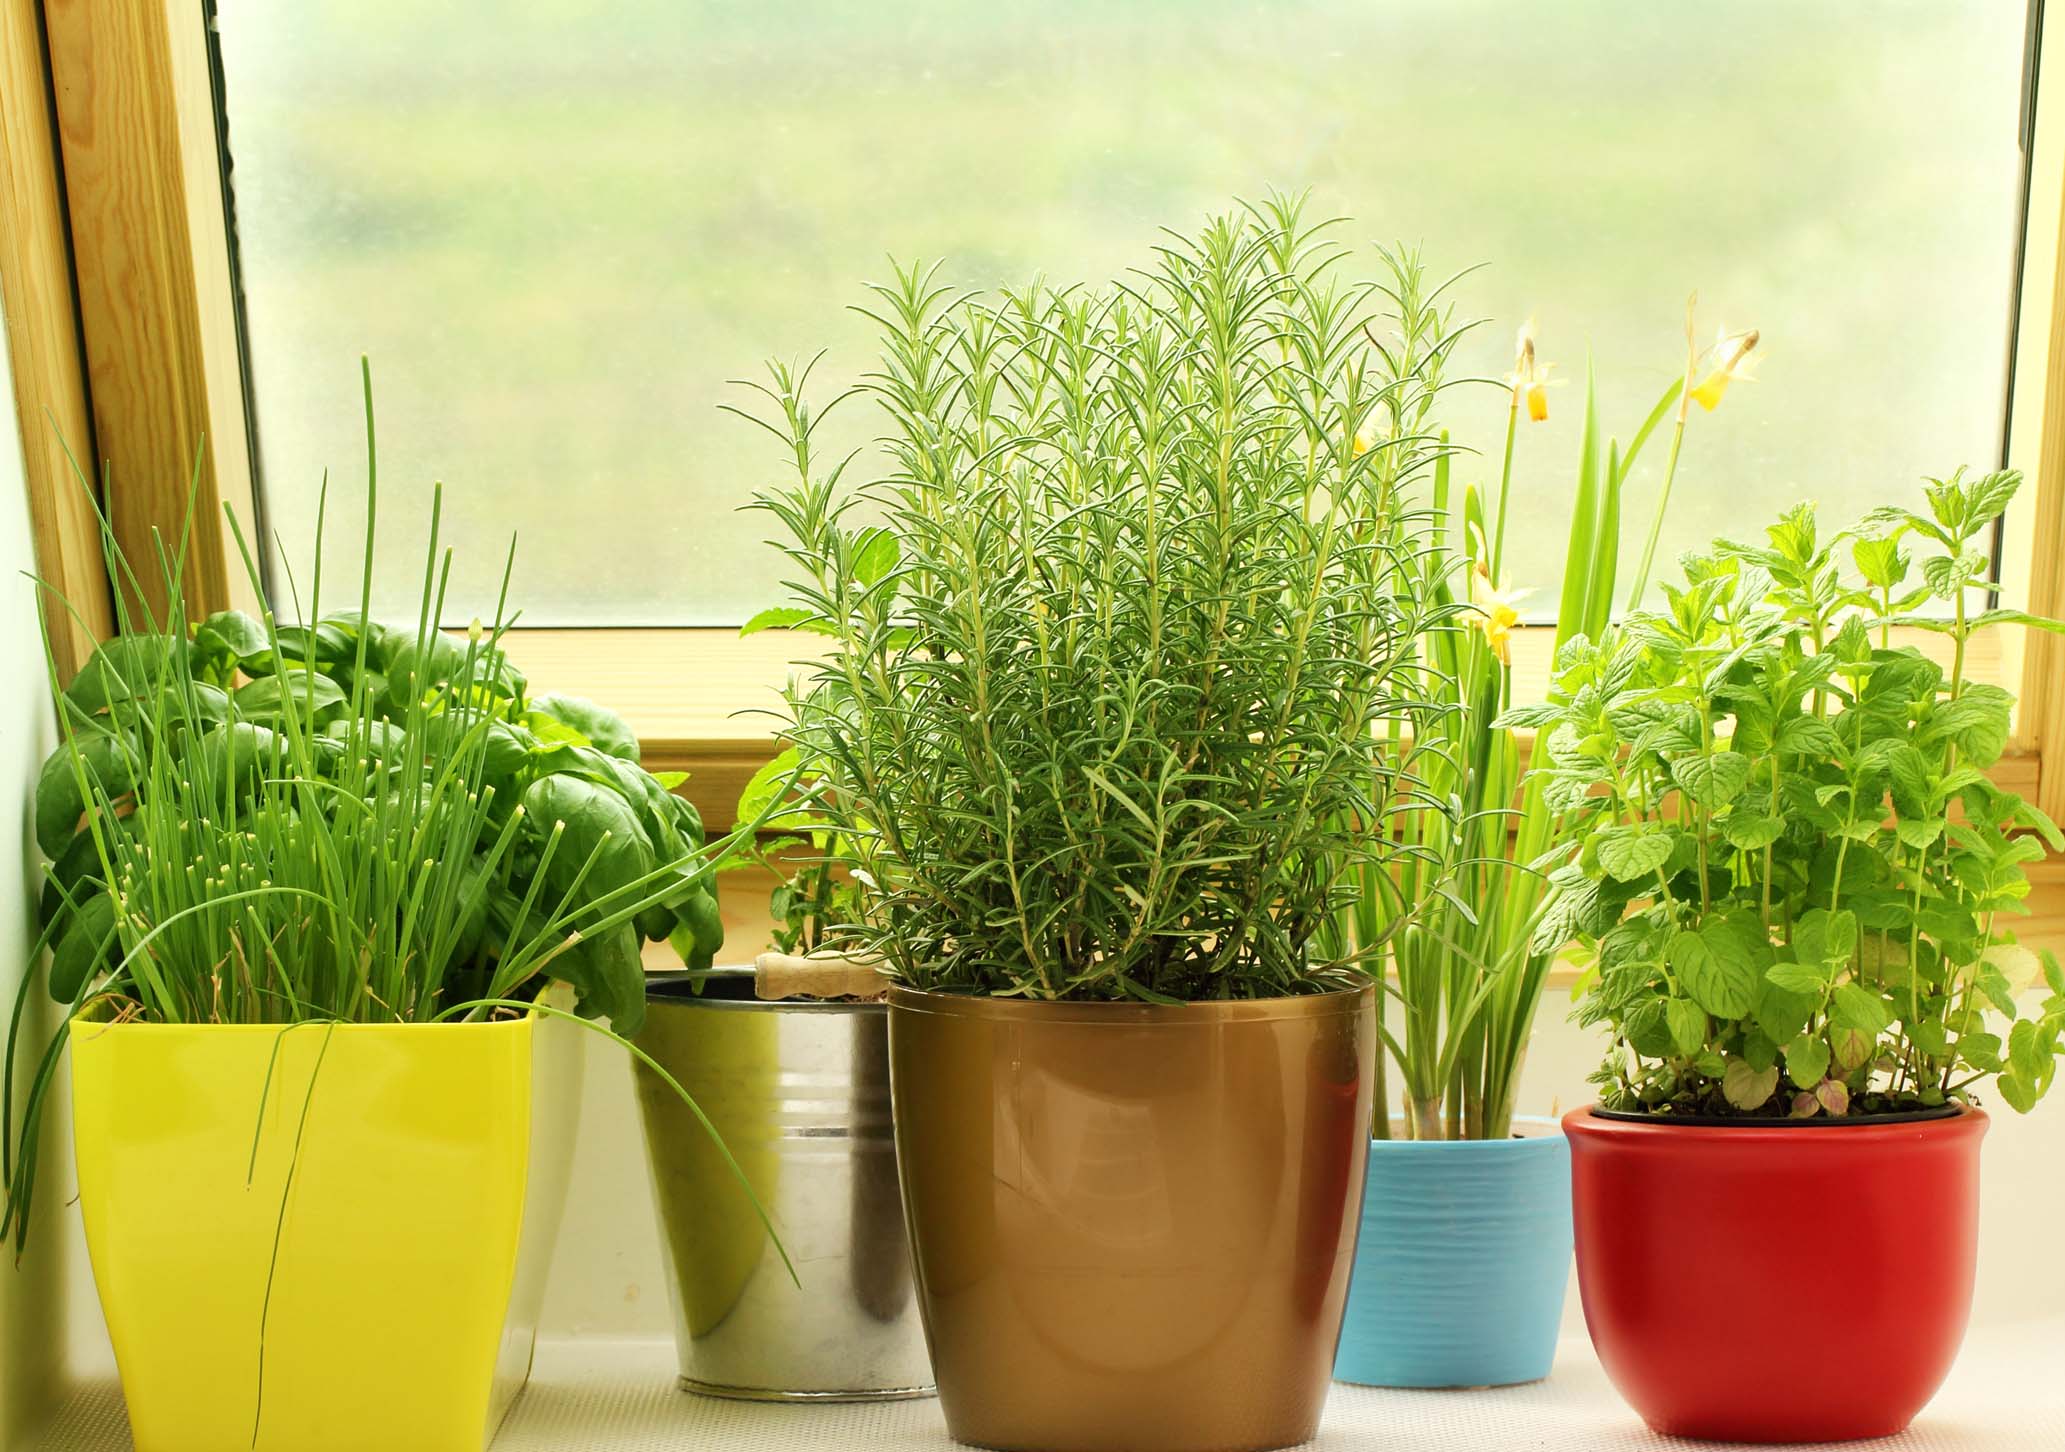 How to Grow and Care for Vegetables, Fruit and Herbs in Containers